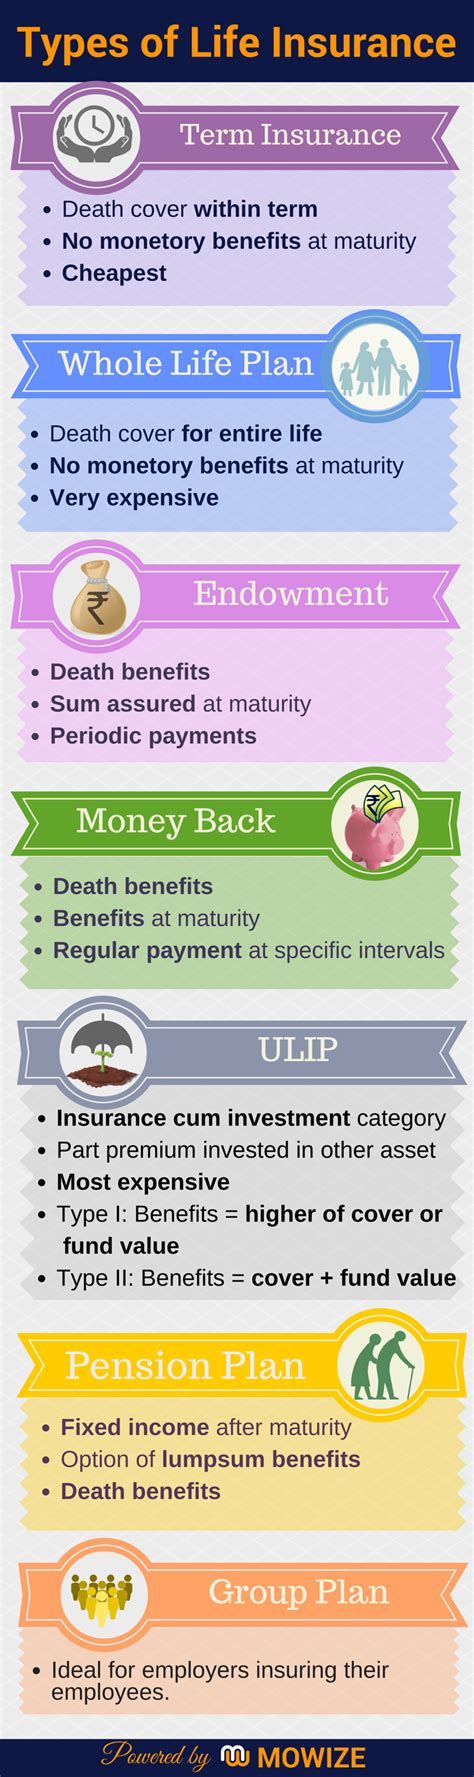 Different kinds of insurance plans. Types of Life Insurance (With images) | Life insurance, Best renters insurance, Insurance marketing